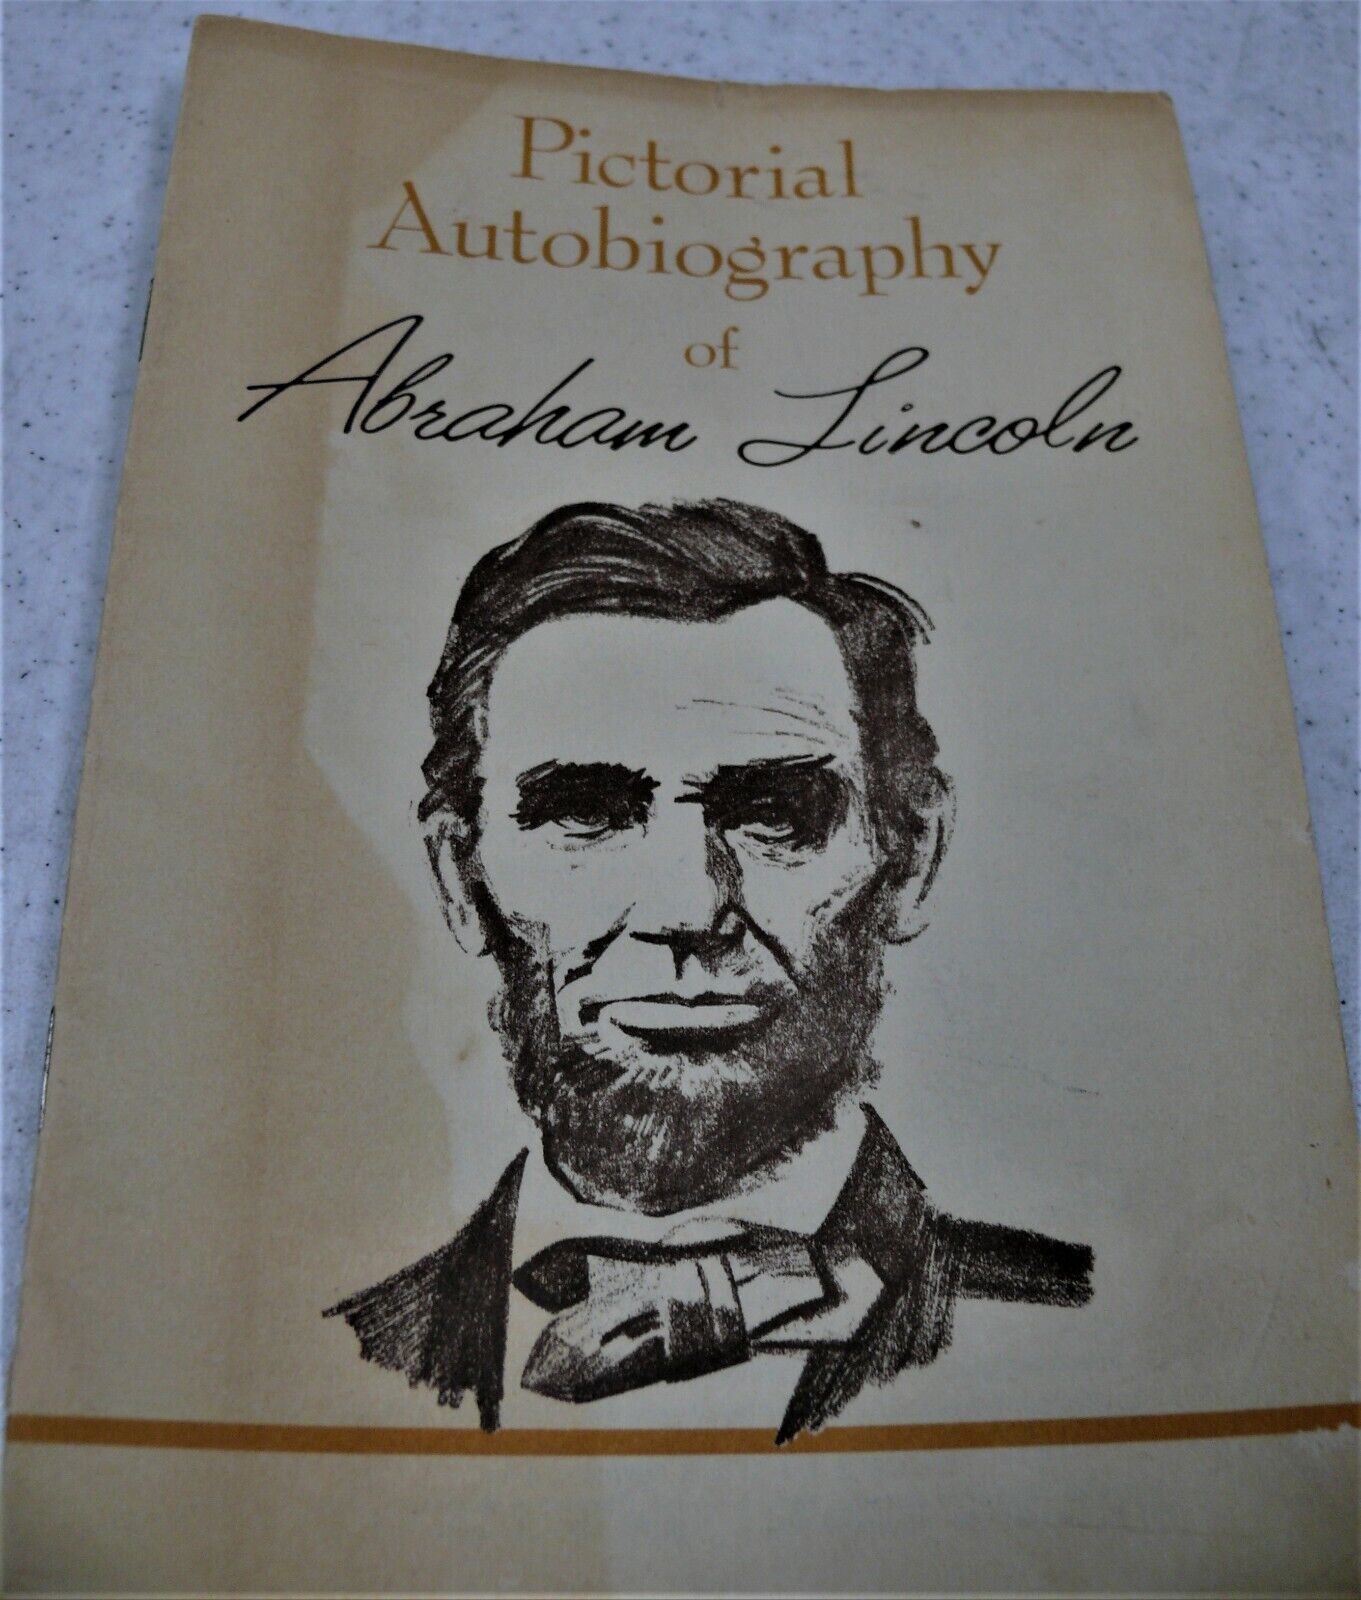 Pictorial Autobiography of Abraham Lincoln 1962  Pictues by J. Morrell   Rare